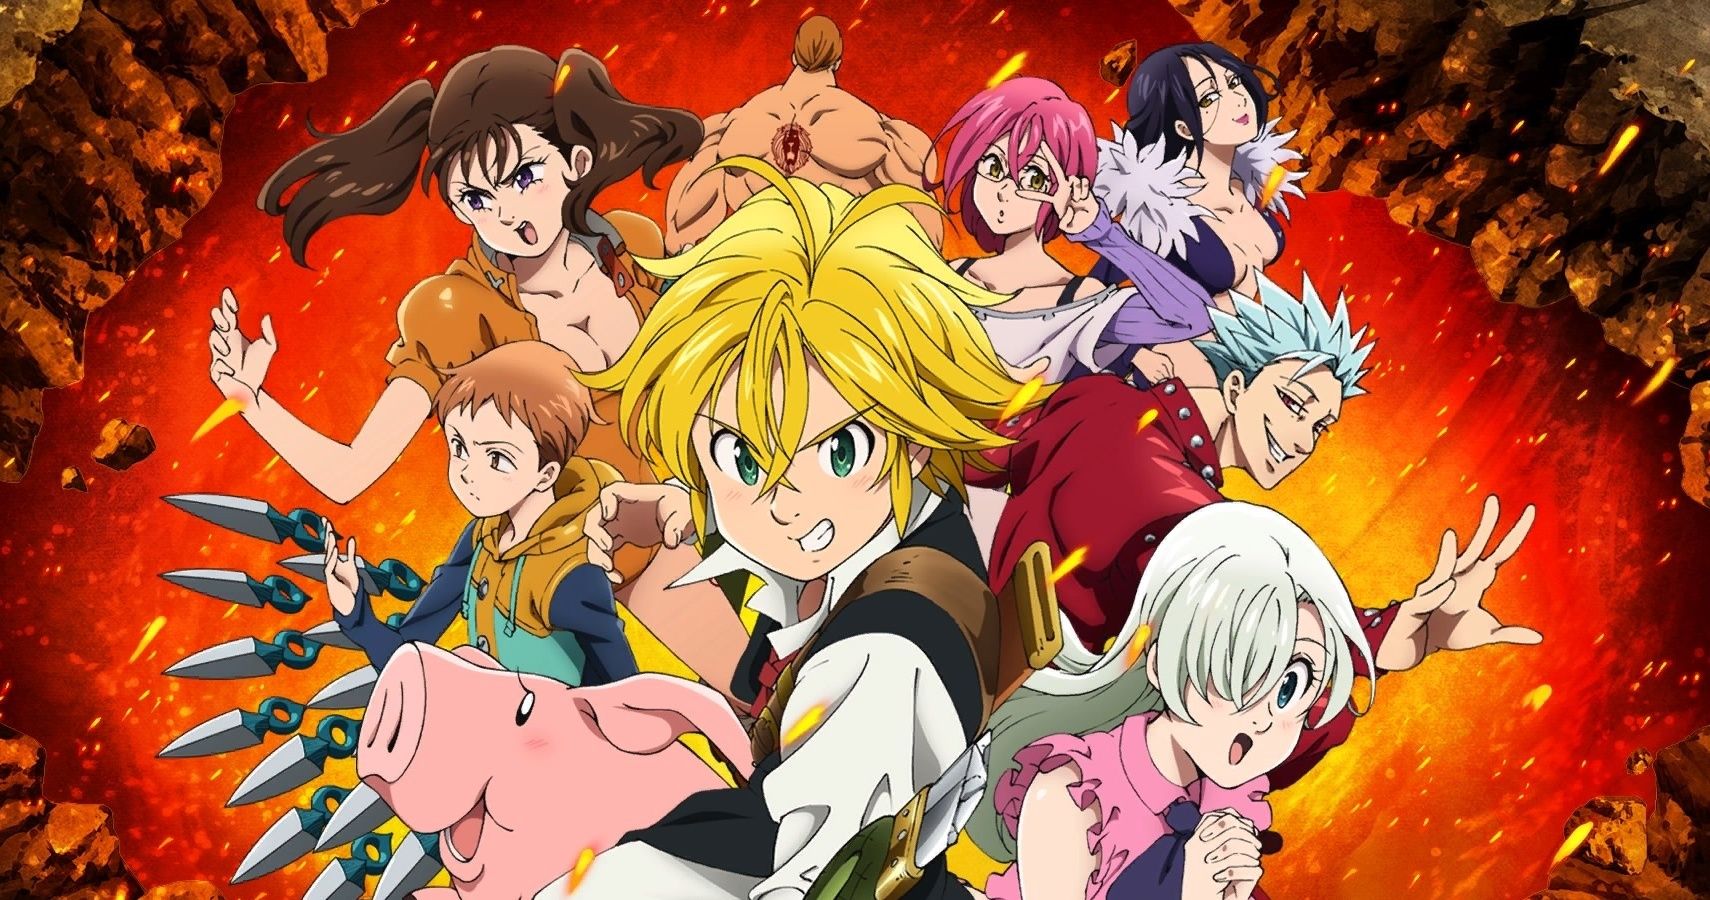 How did The Seven Deadly Sins anime lose its popularity so fast